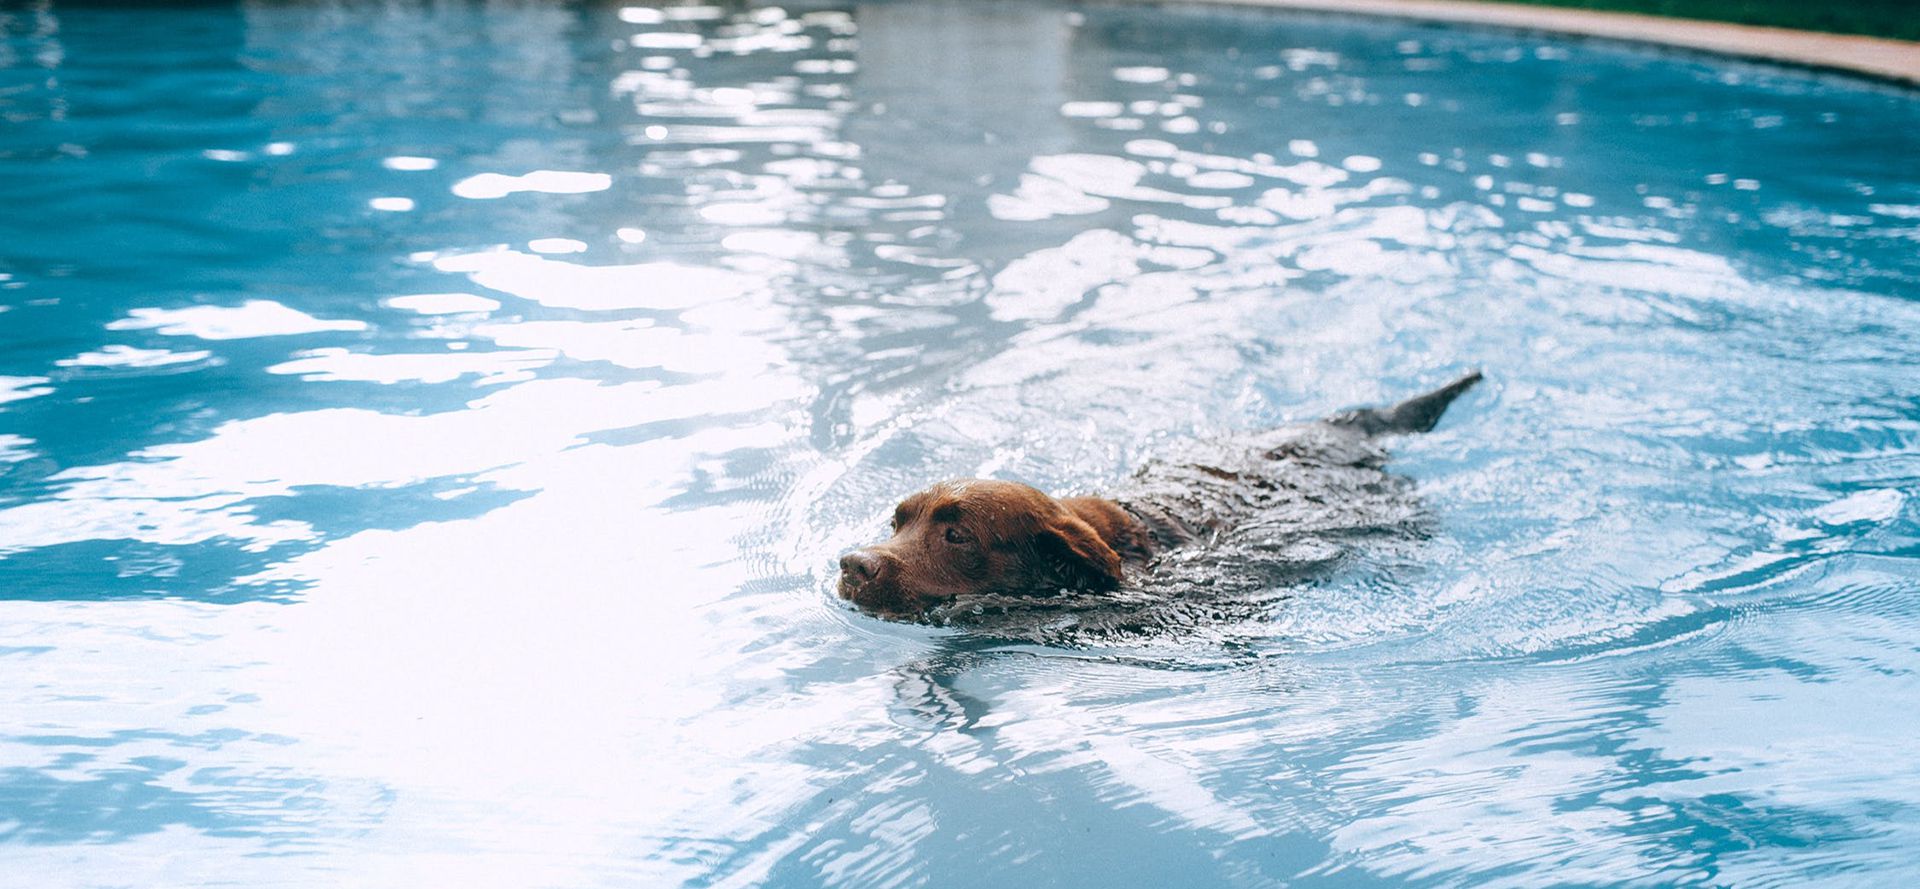 A Dog Training To Swim In The Pool.